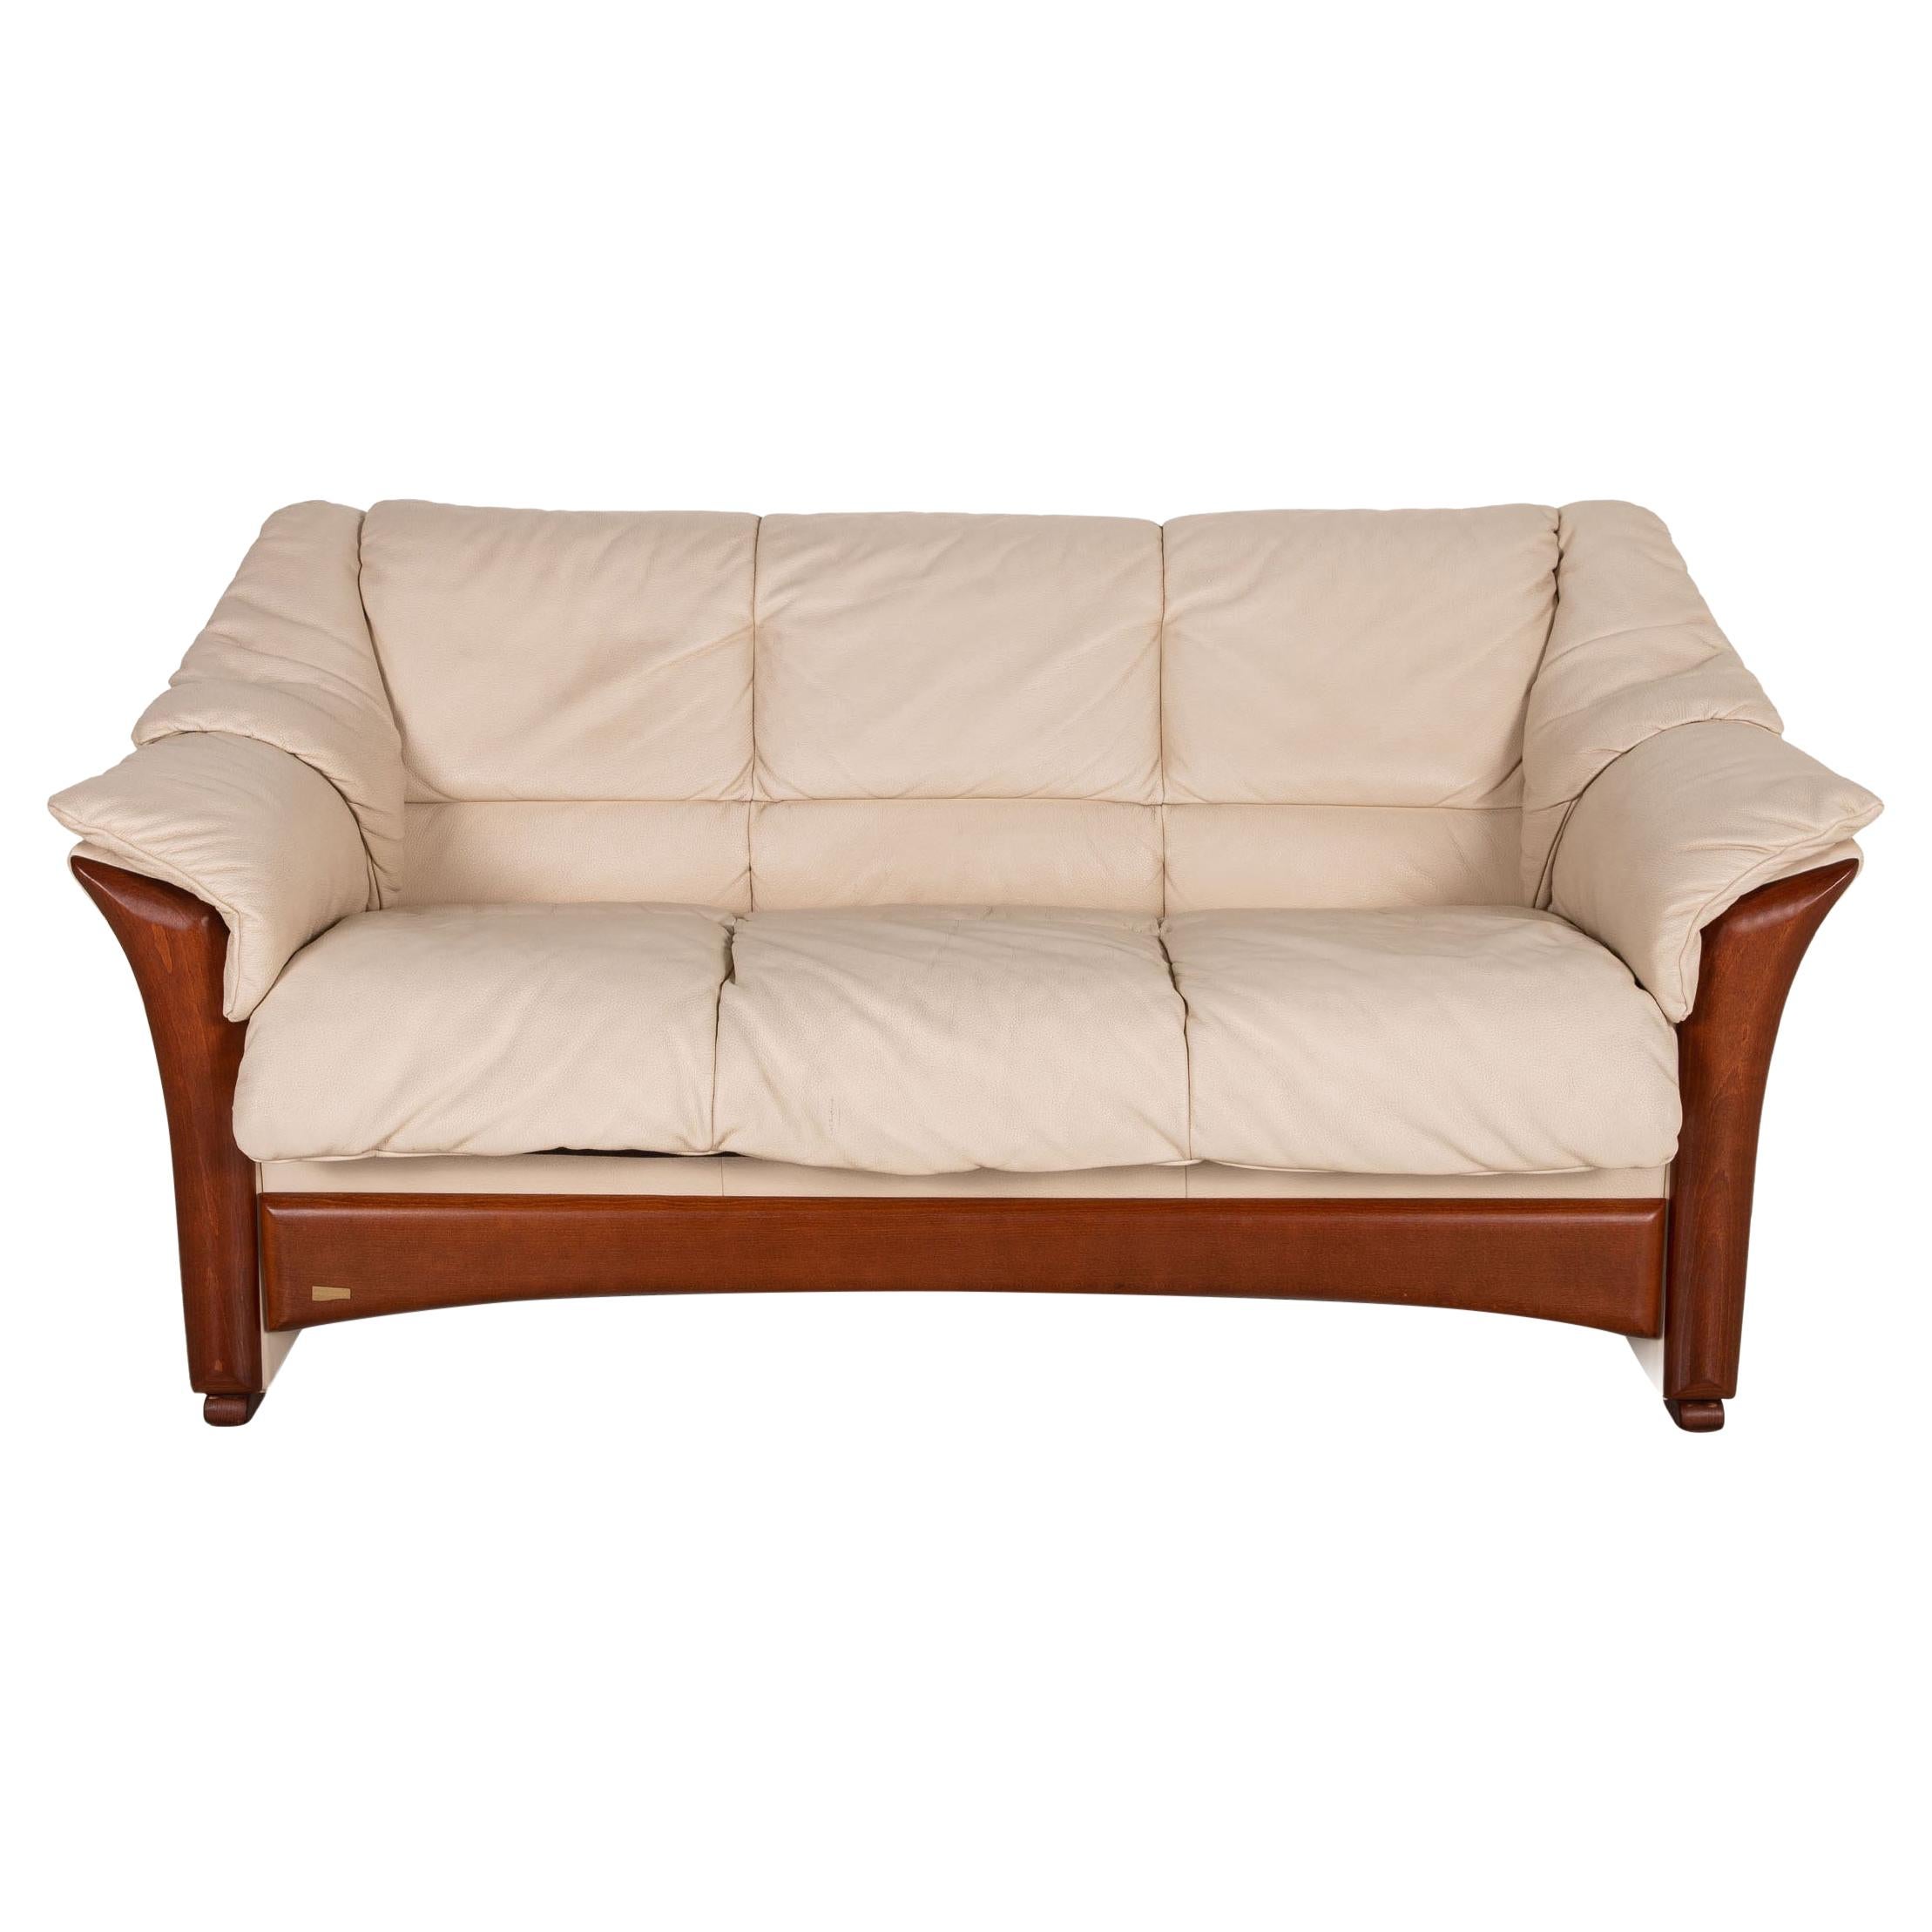 Stressless Oslo Leather Sofa Cream Three Seater Couch For Sale